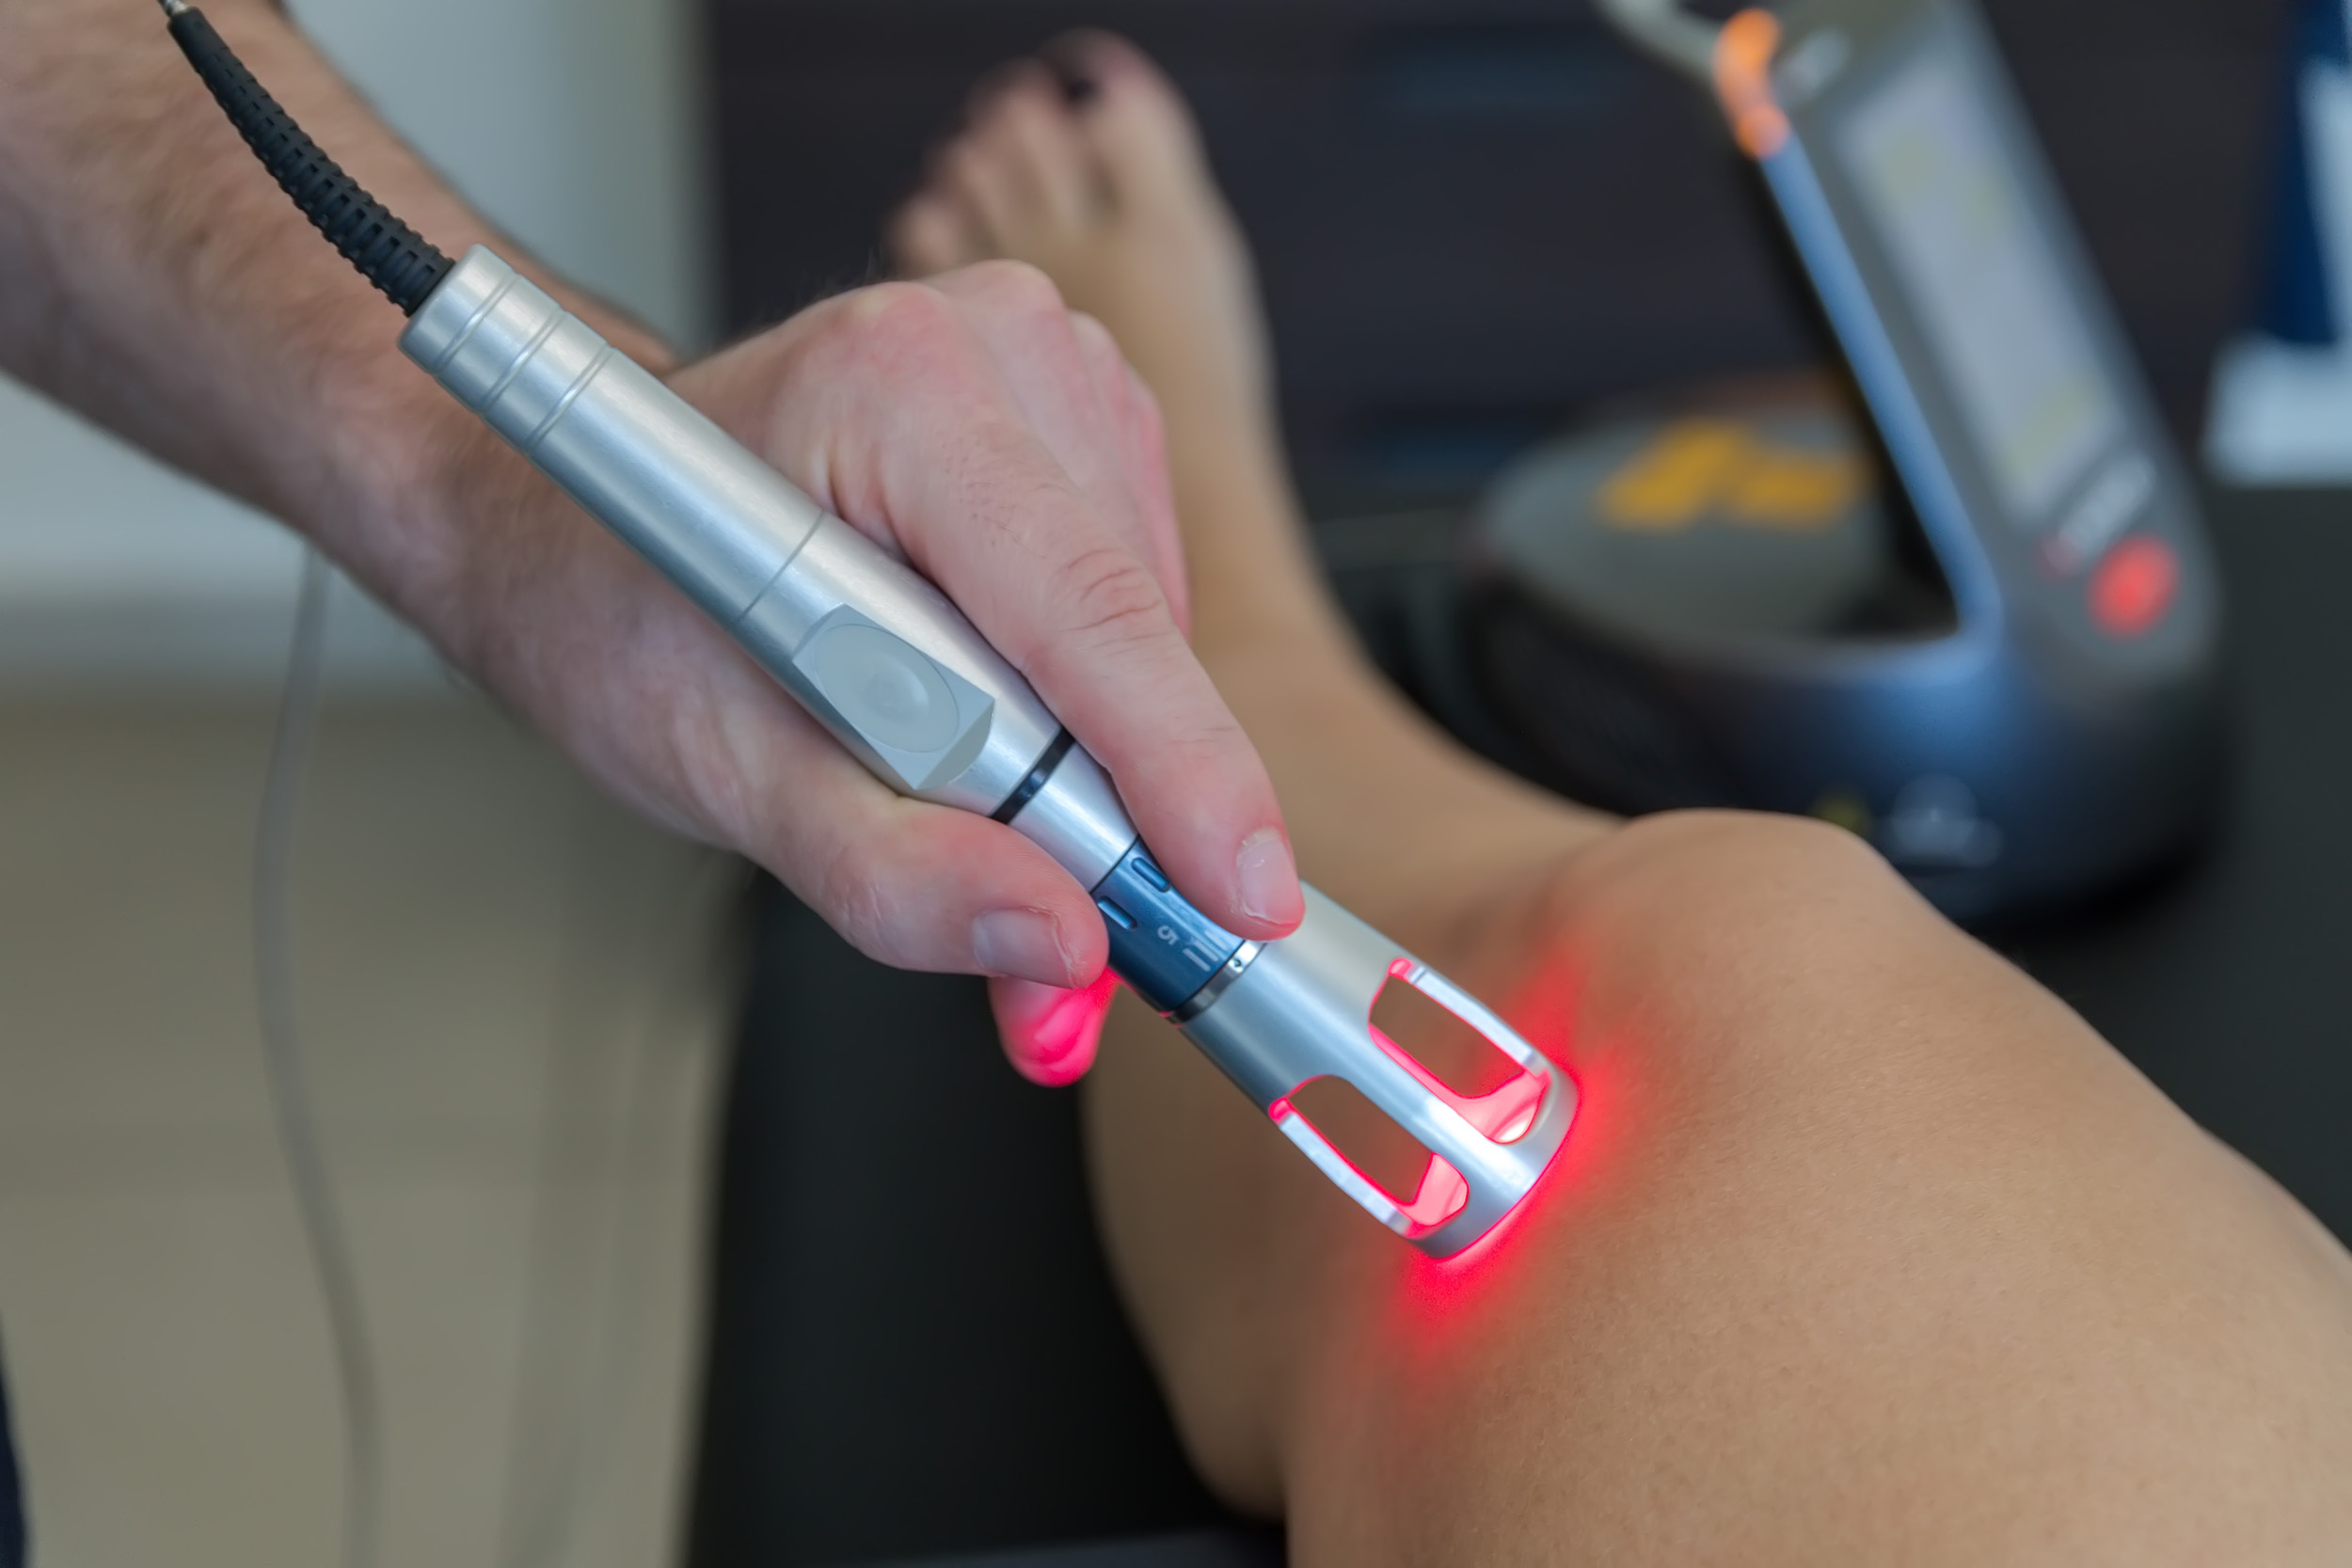 Laser therapy on a knee used to treat pain